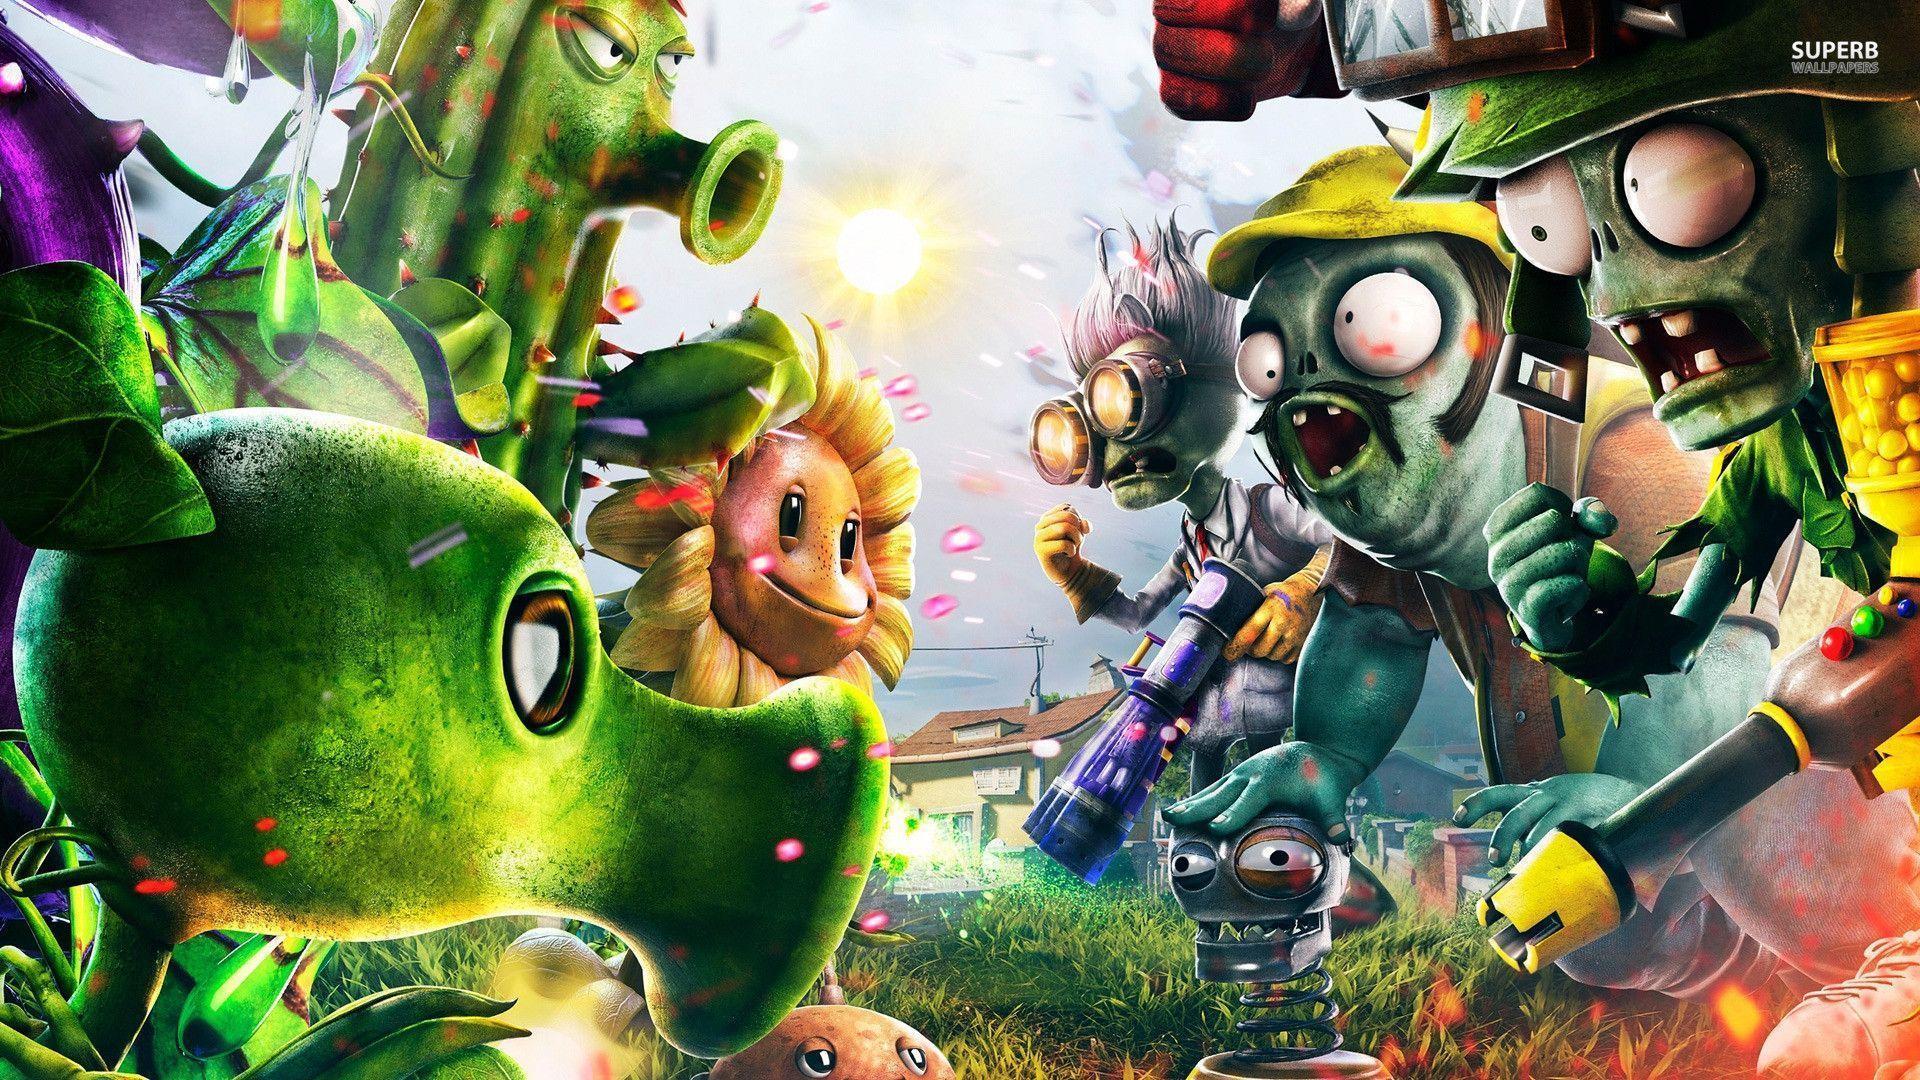 Plants Vs Zombies Wallpapers Wallpaper Cave, image source: wallpapercave.co...